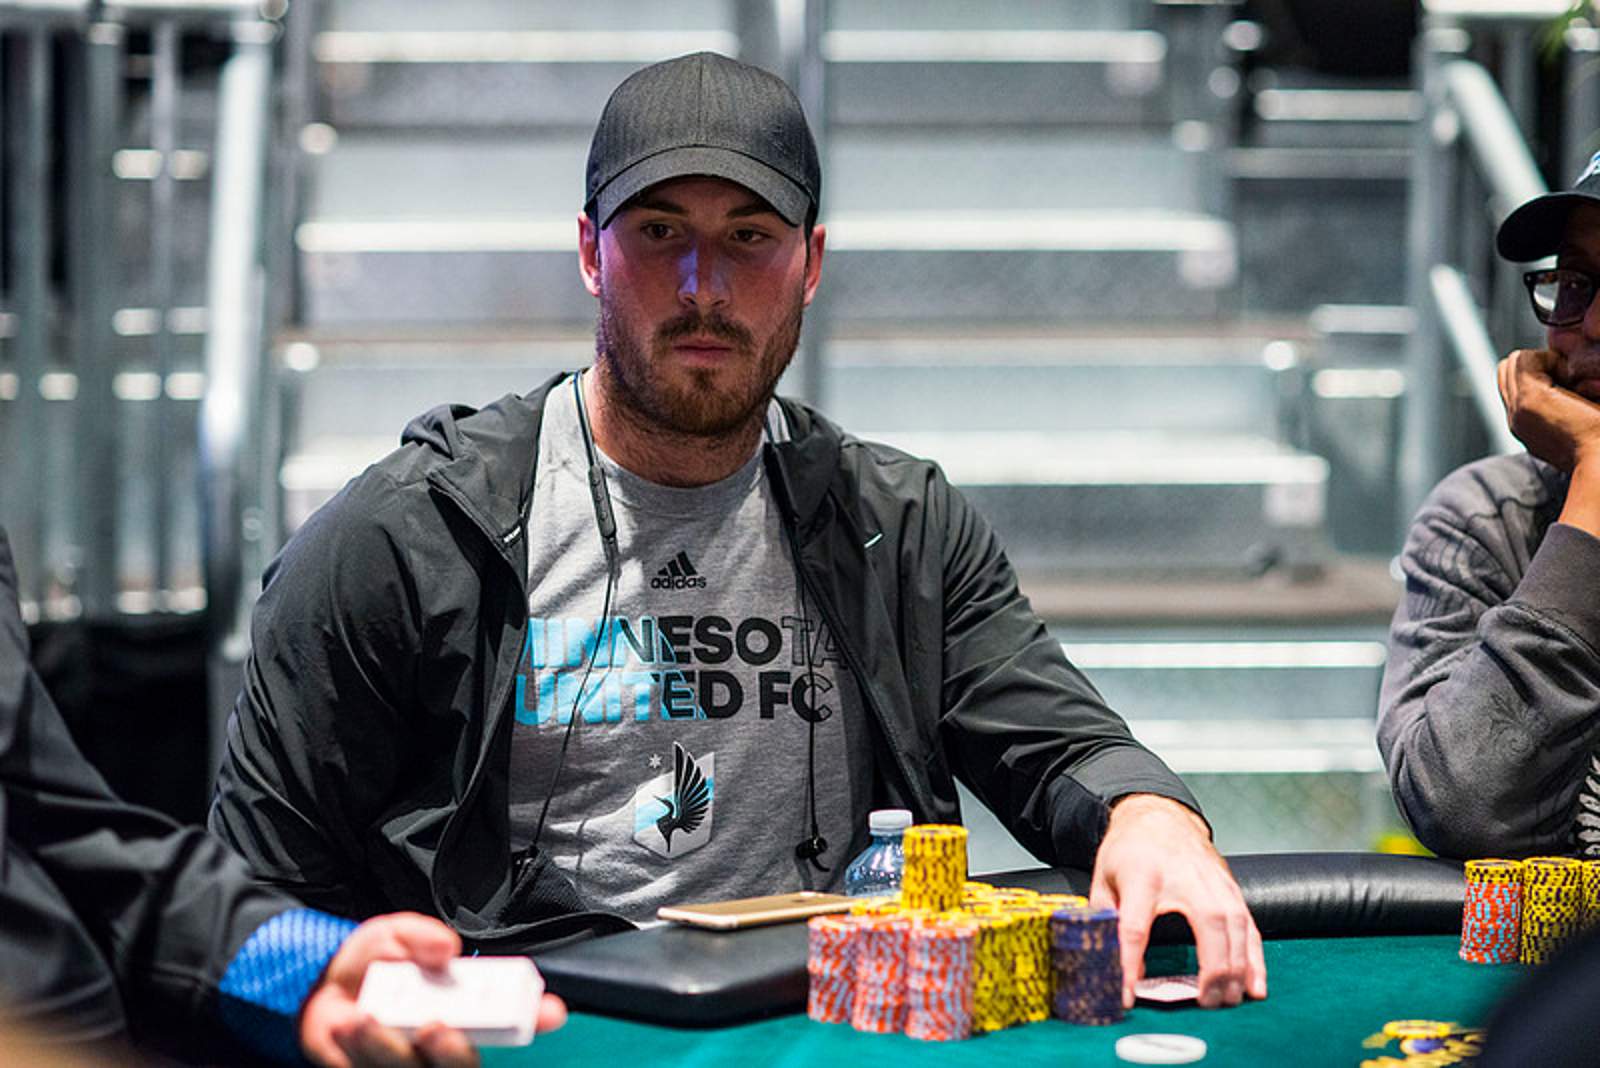 Pro Soccer Player Brent Kallman on Pace for Rock 'N Roll WPT Final Table on PokerGO